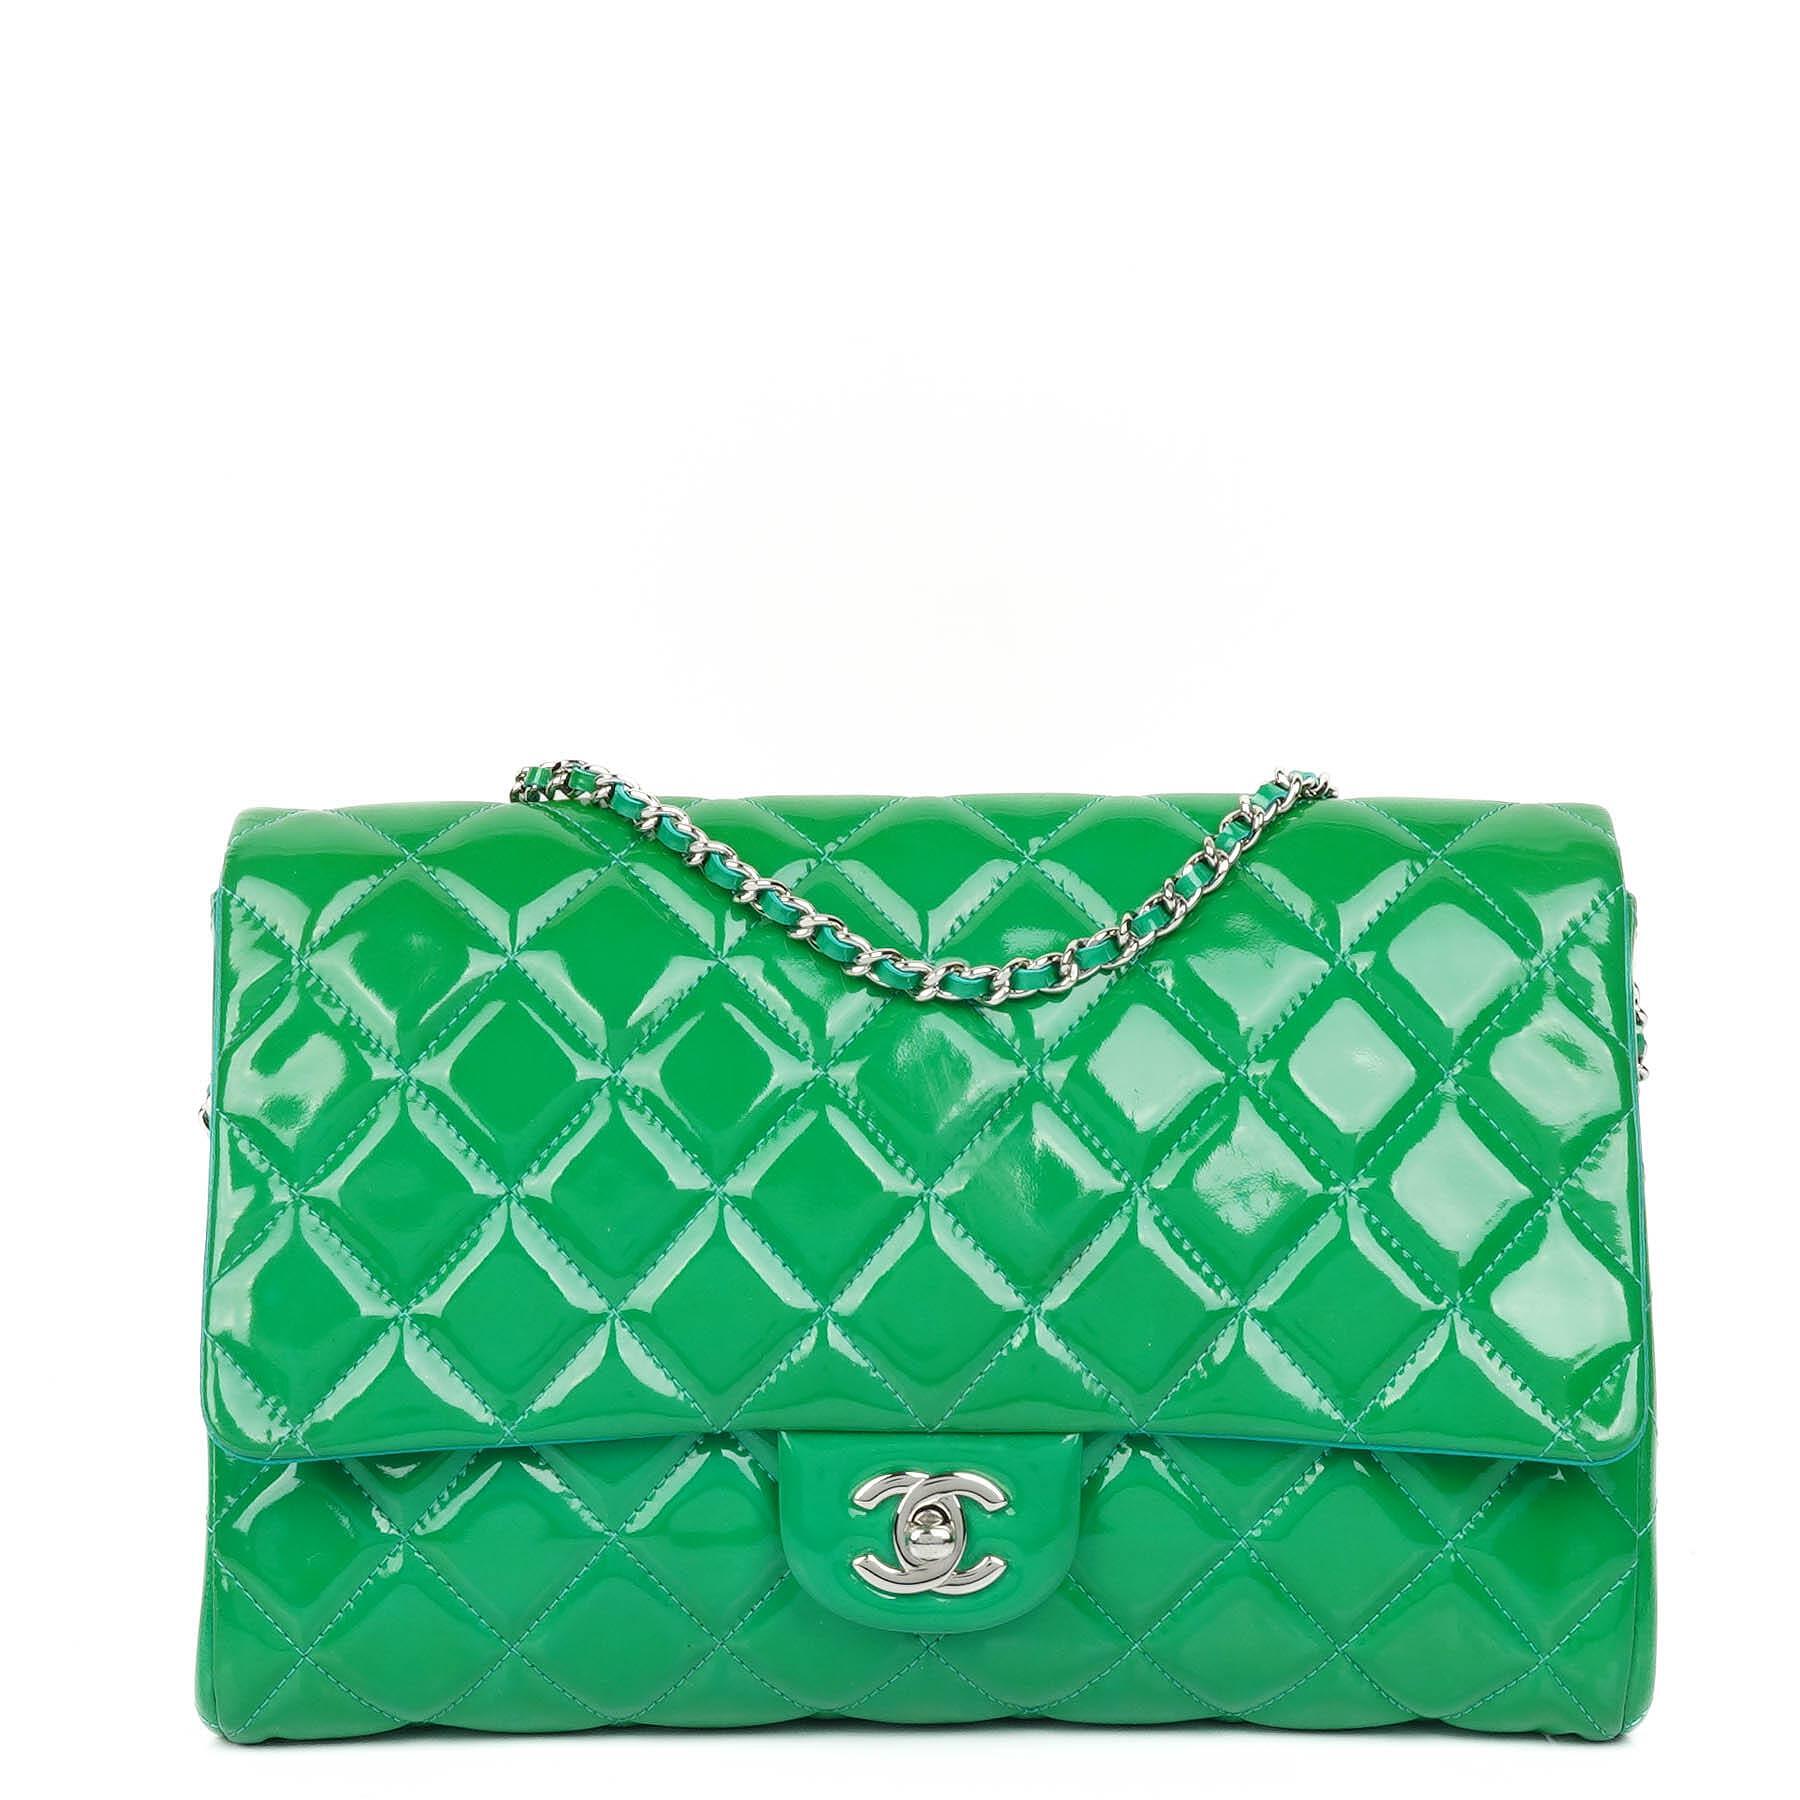 Chanel Green Quilted Patent Leather Classic Flap Bag With Silver